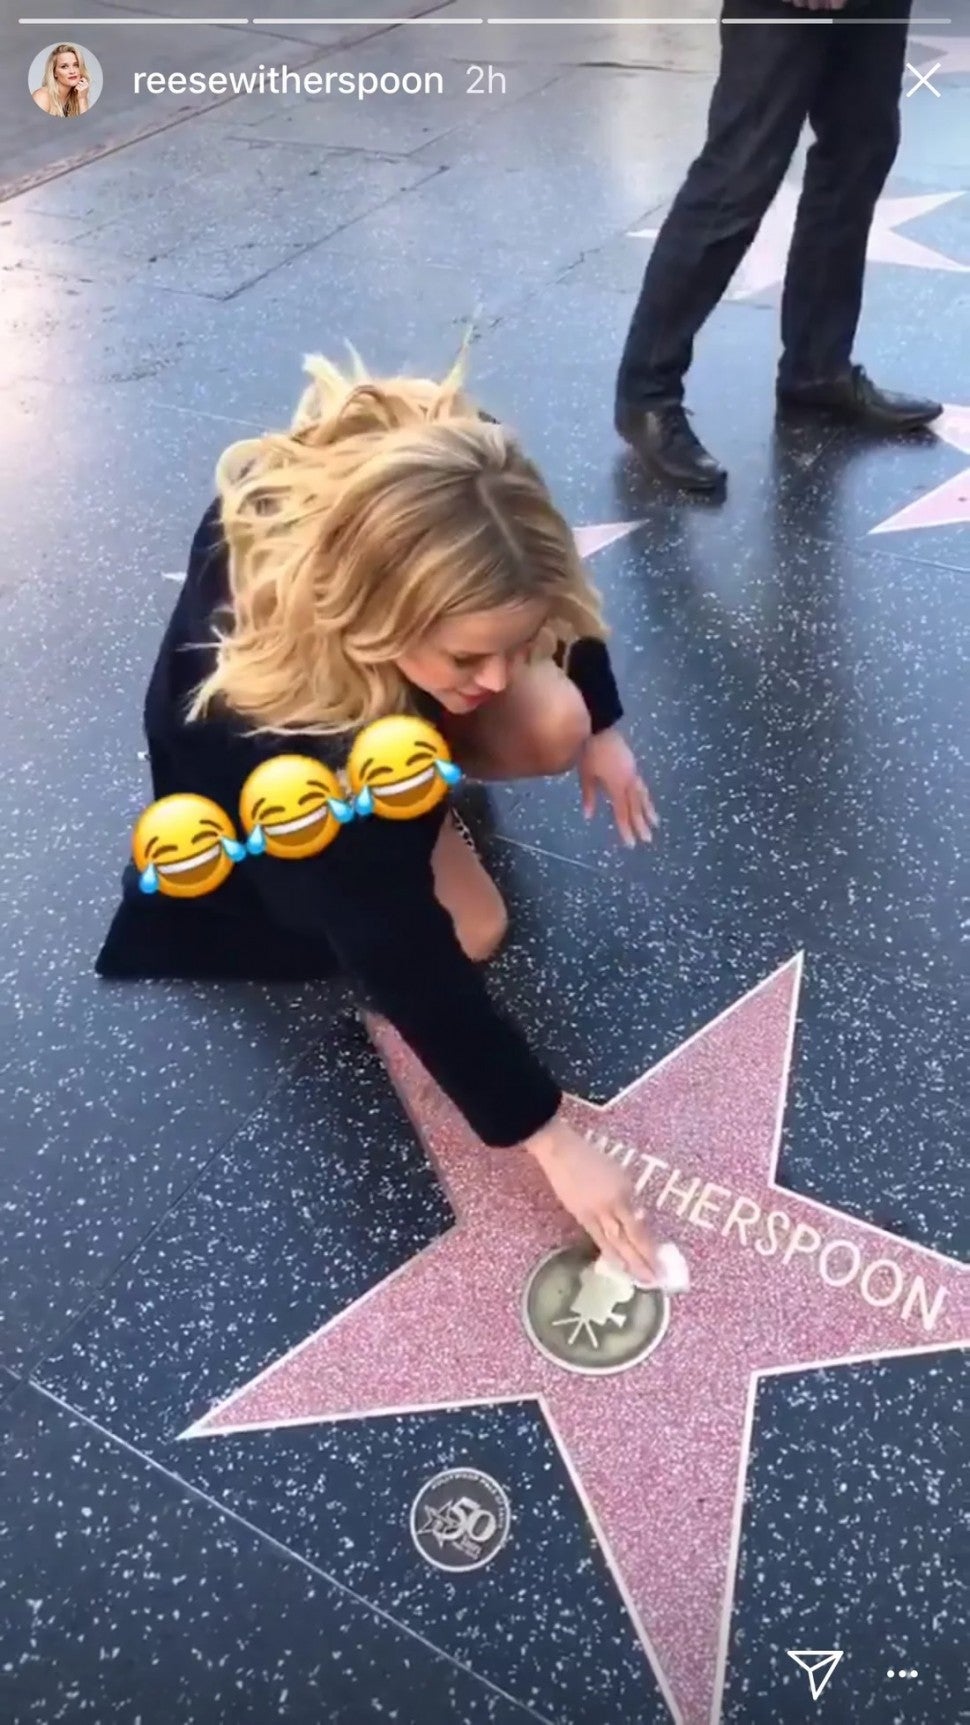 Reese Witherspoon at her Walk of Fame Star 2018